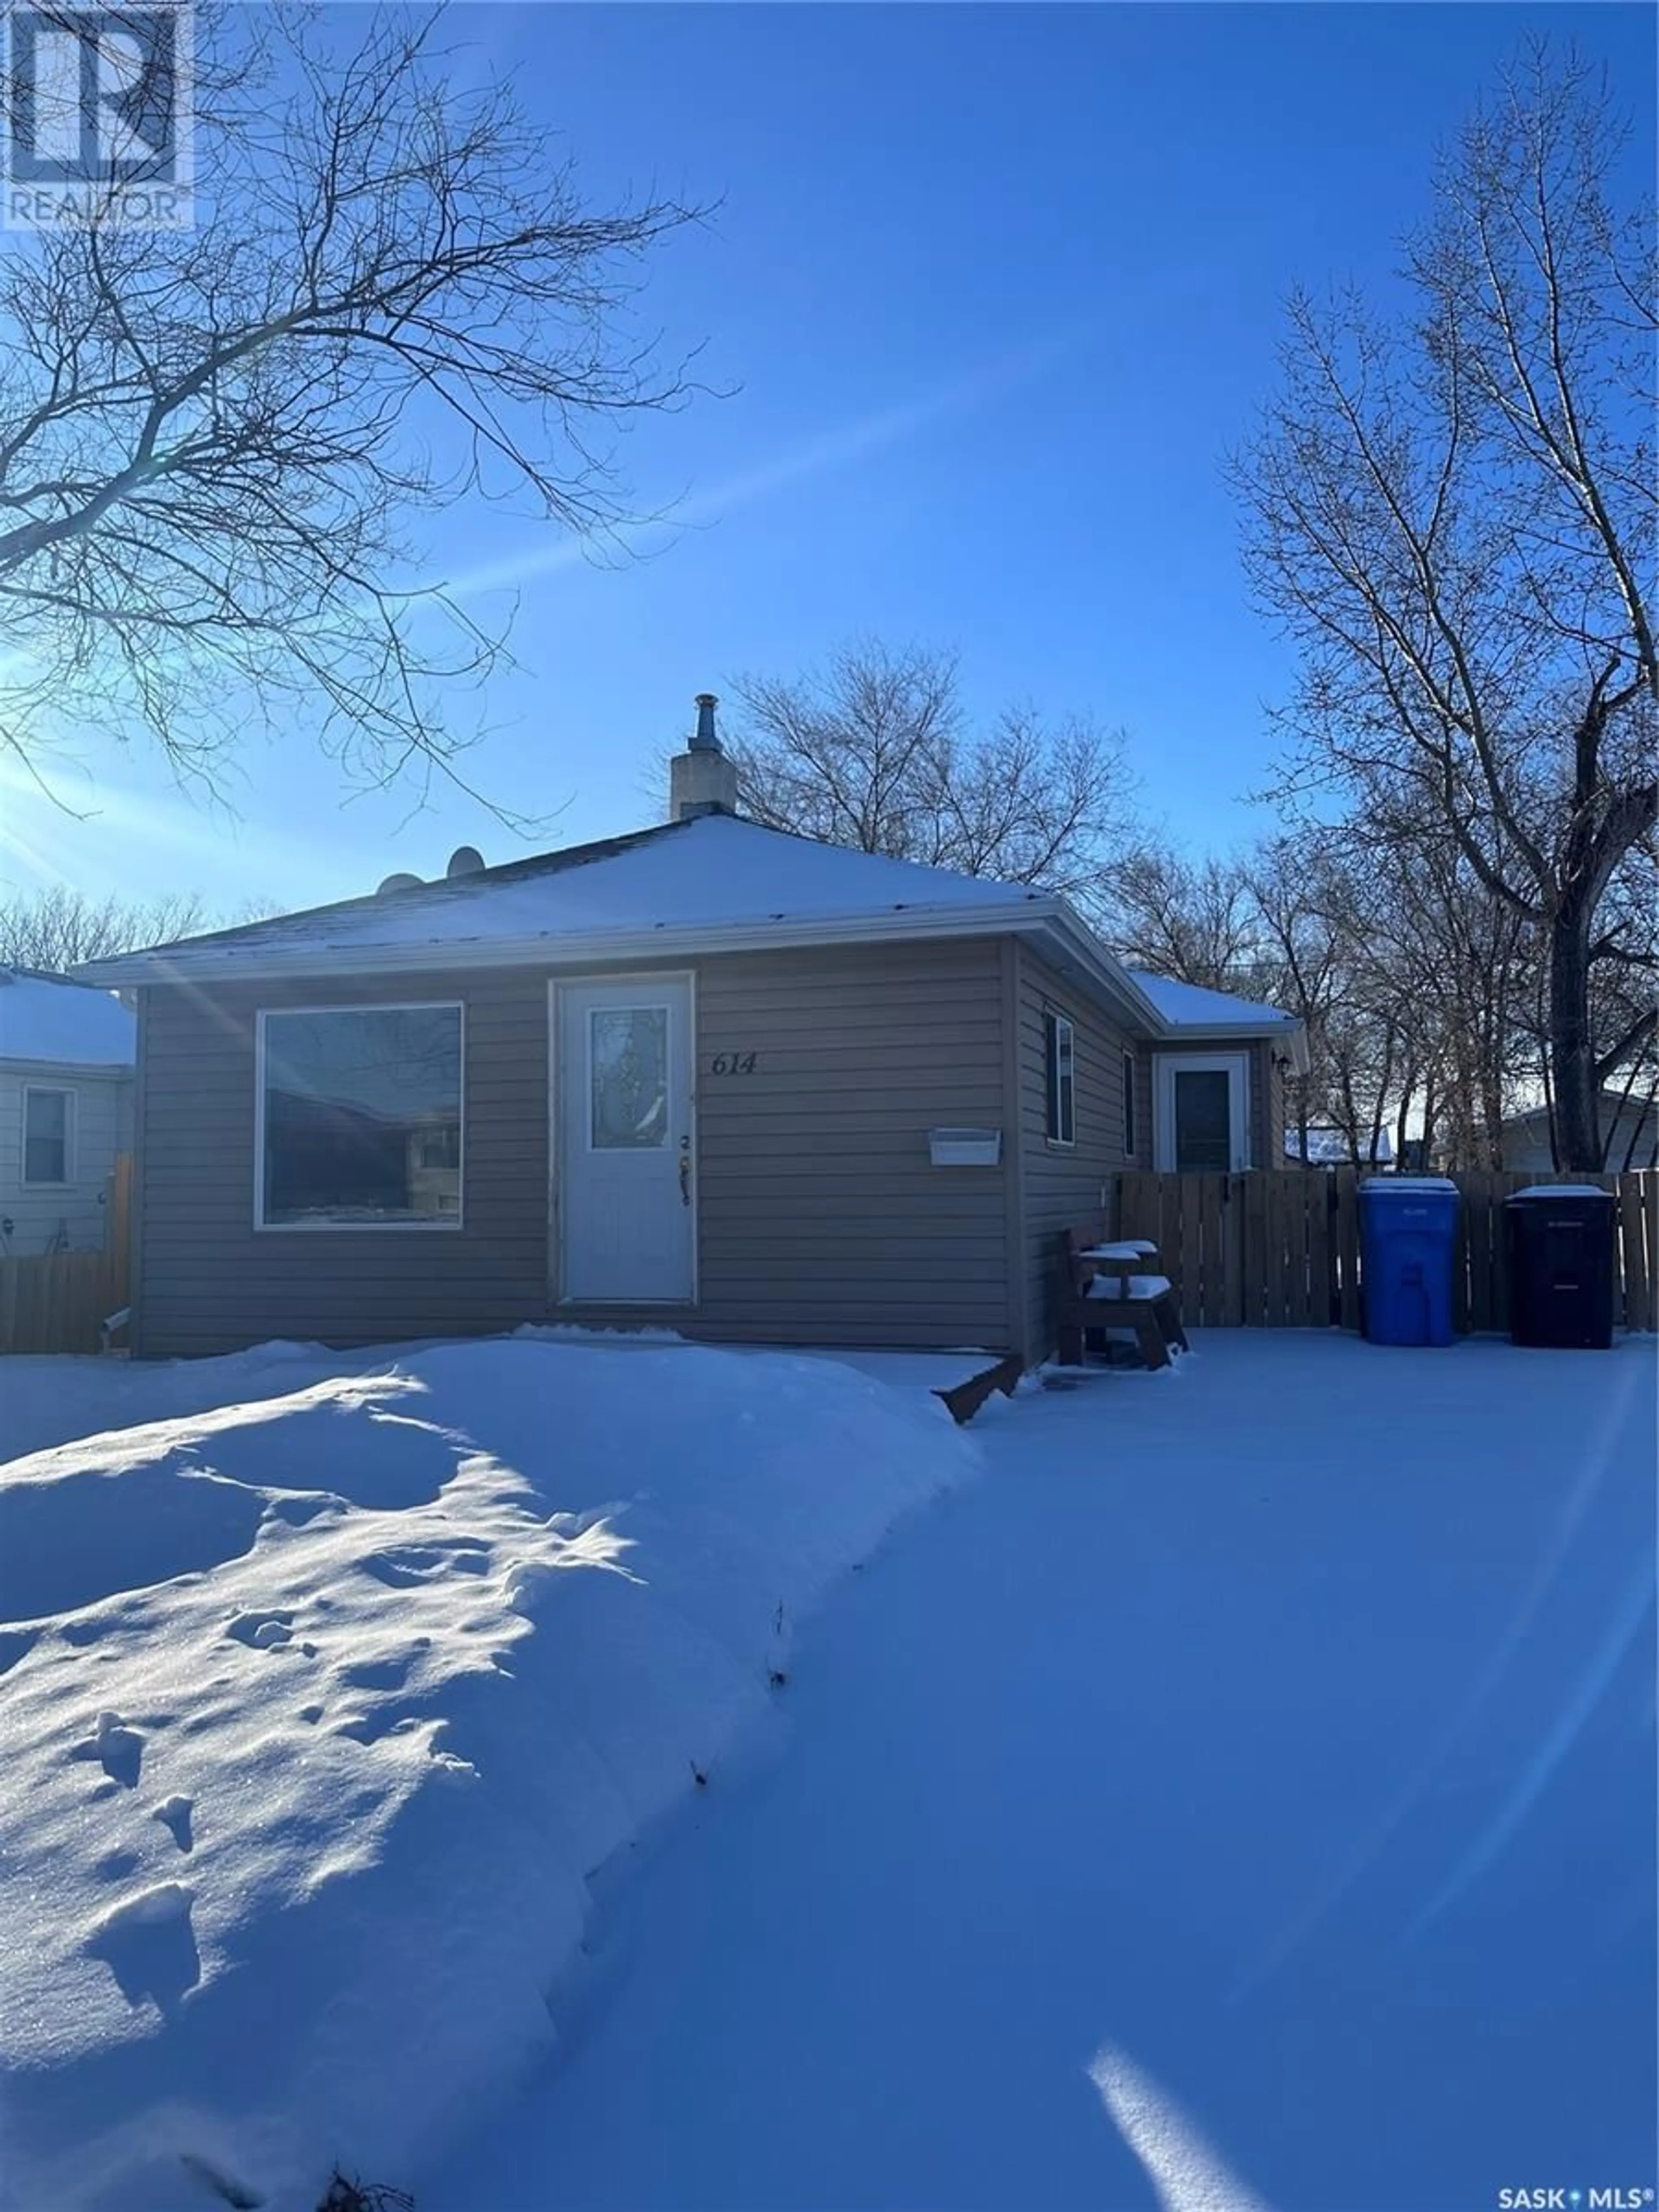 Home with unknown exterior material for 614 George STREET, Estevan Saskatchewan S4A1L9